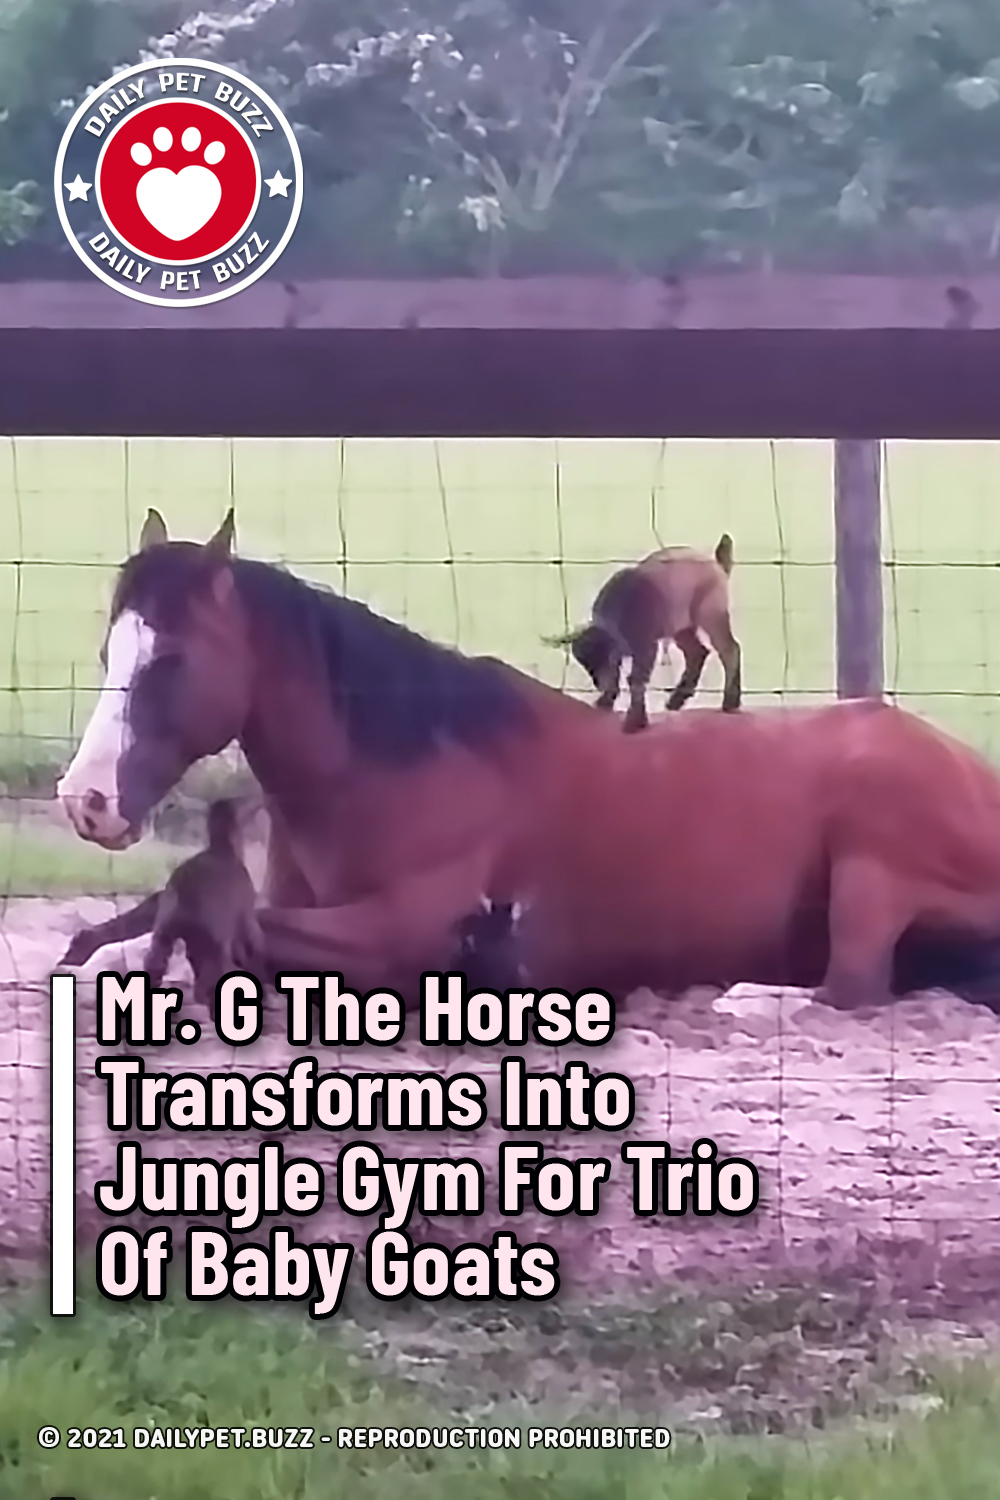 Mr. G The Horse Transforms Into Jungle Gym For Trio Of Baby Goats